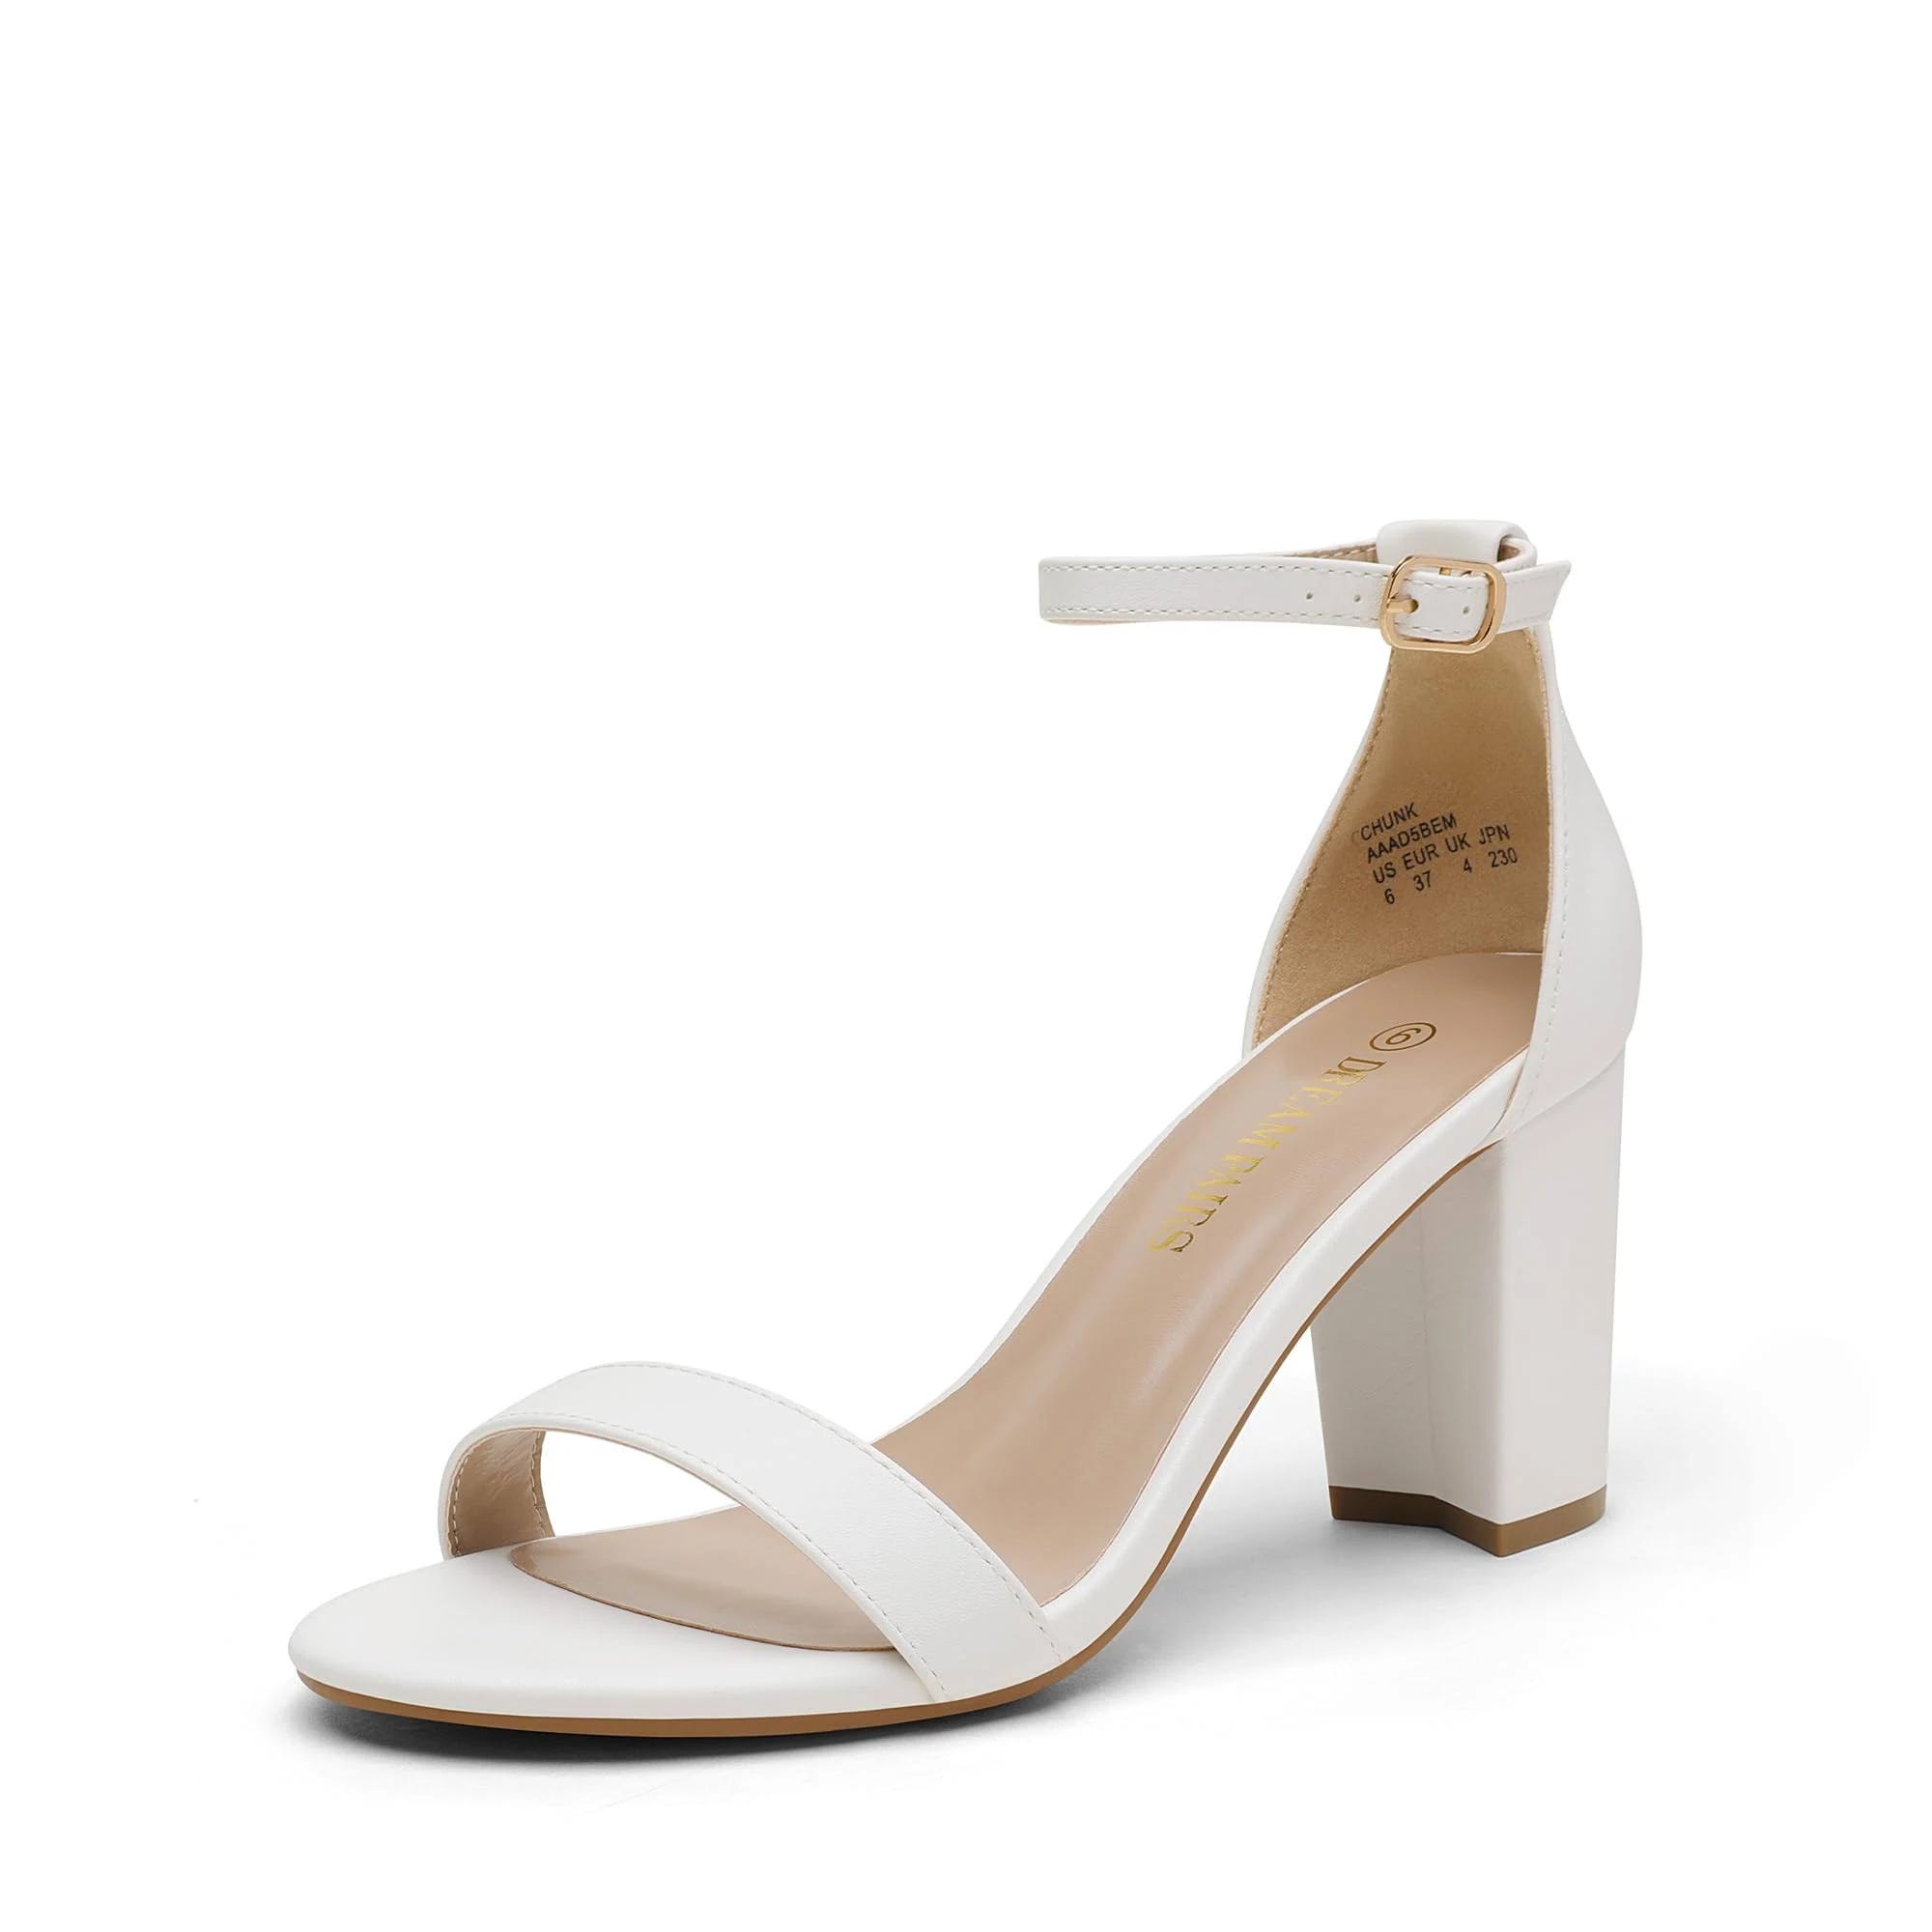 Dreamy Buckle Heeled Sandals with Comfortable Padded Insole | Image